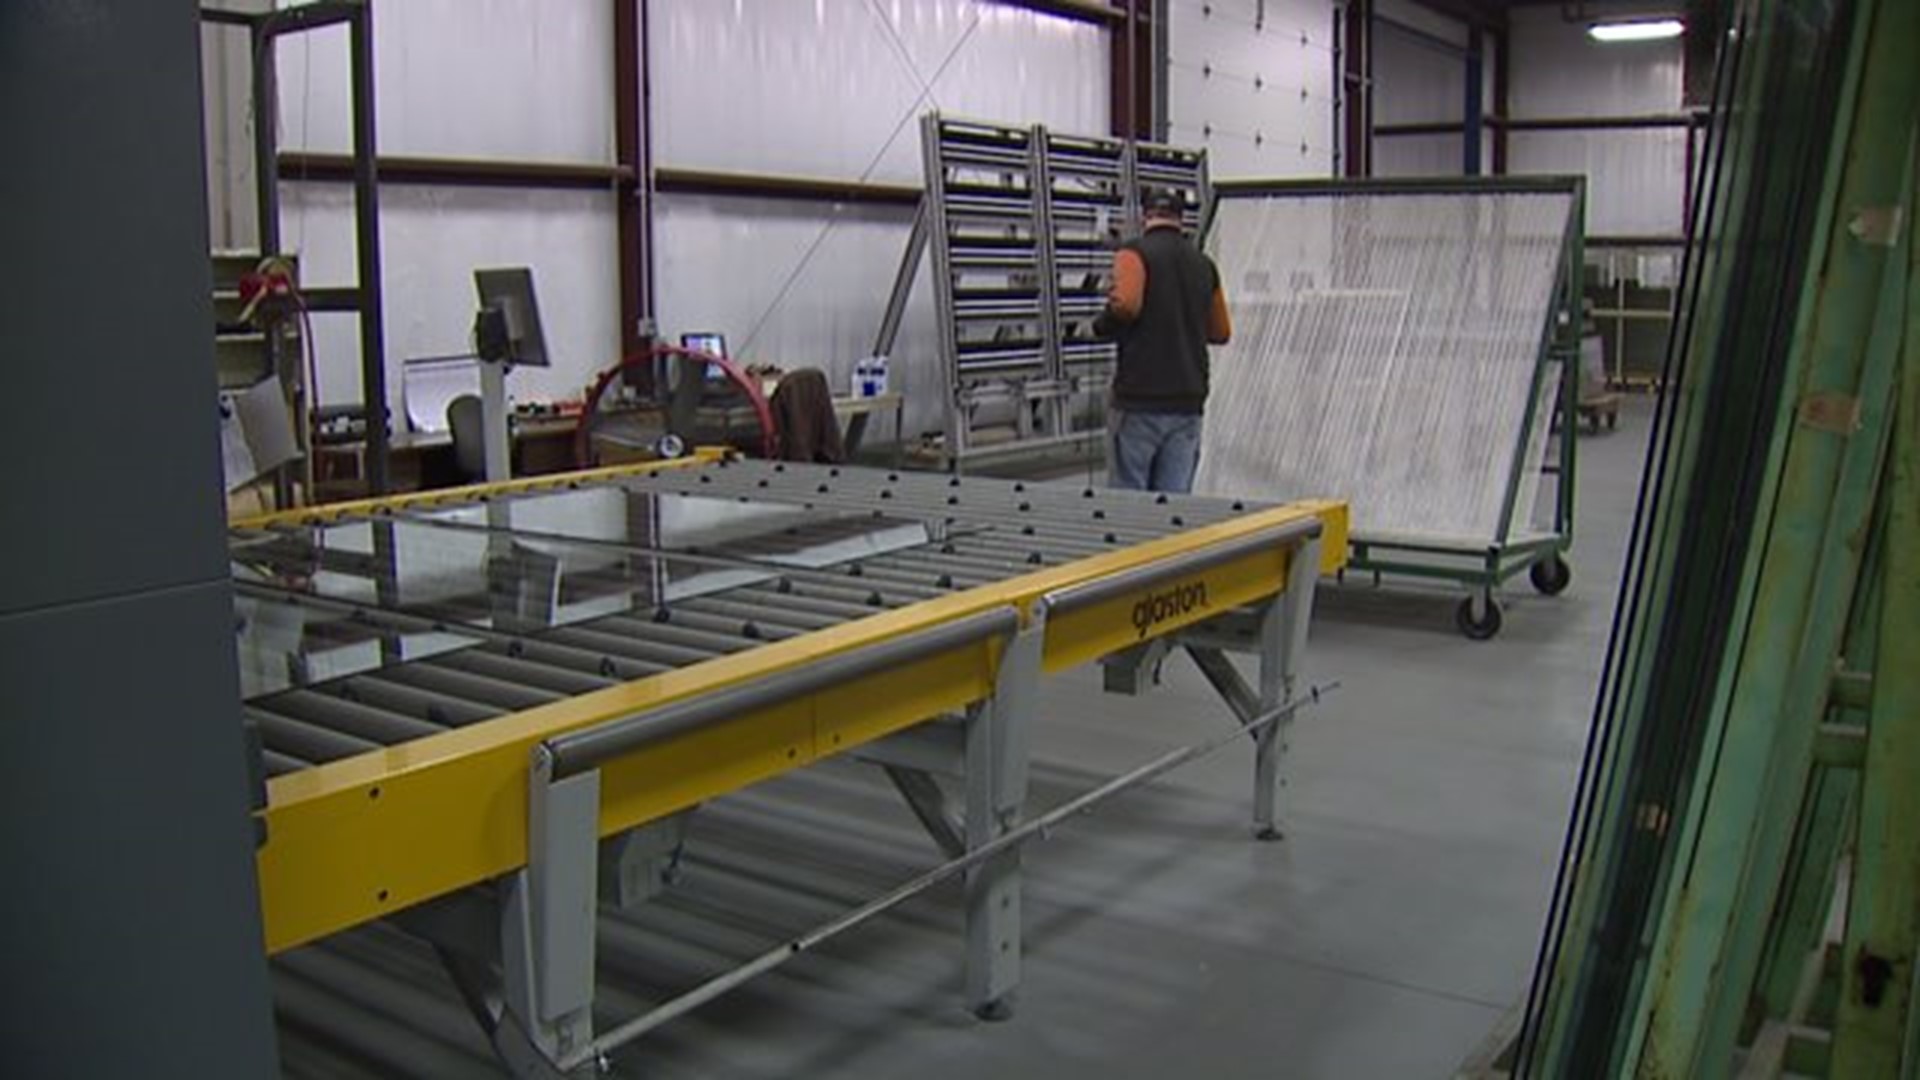 Local company says new travel restrictions will be detrimental for business